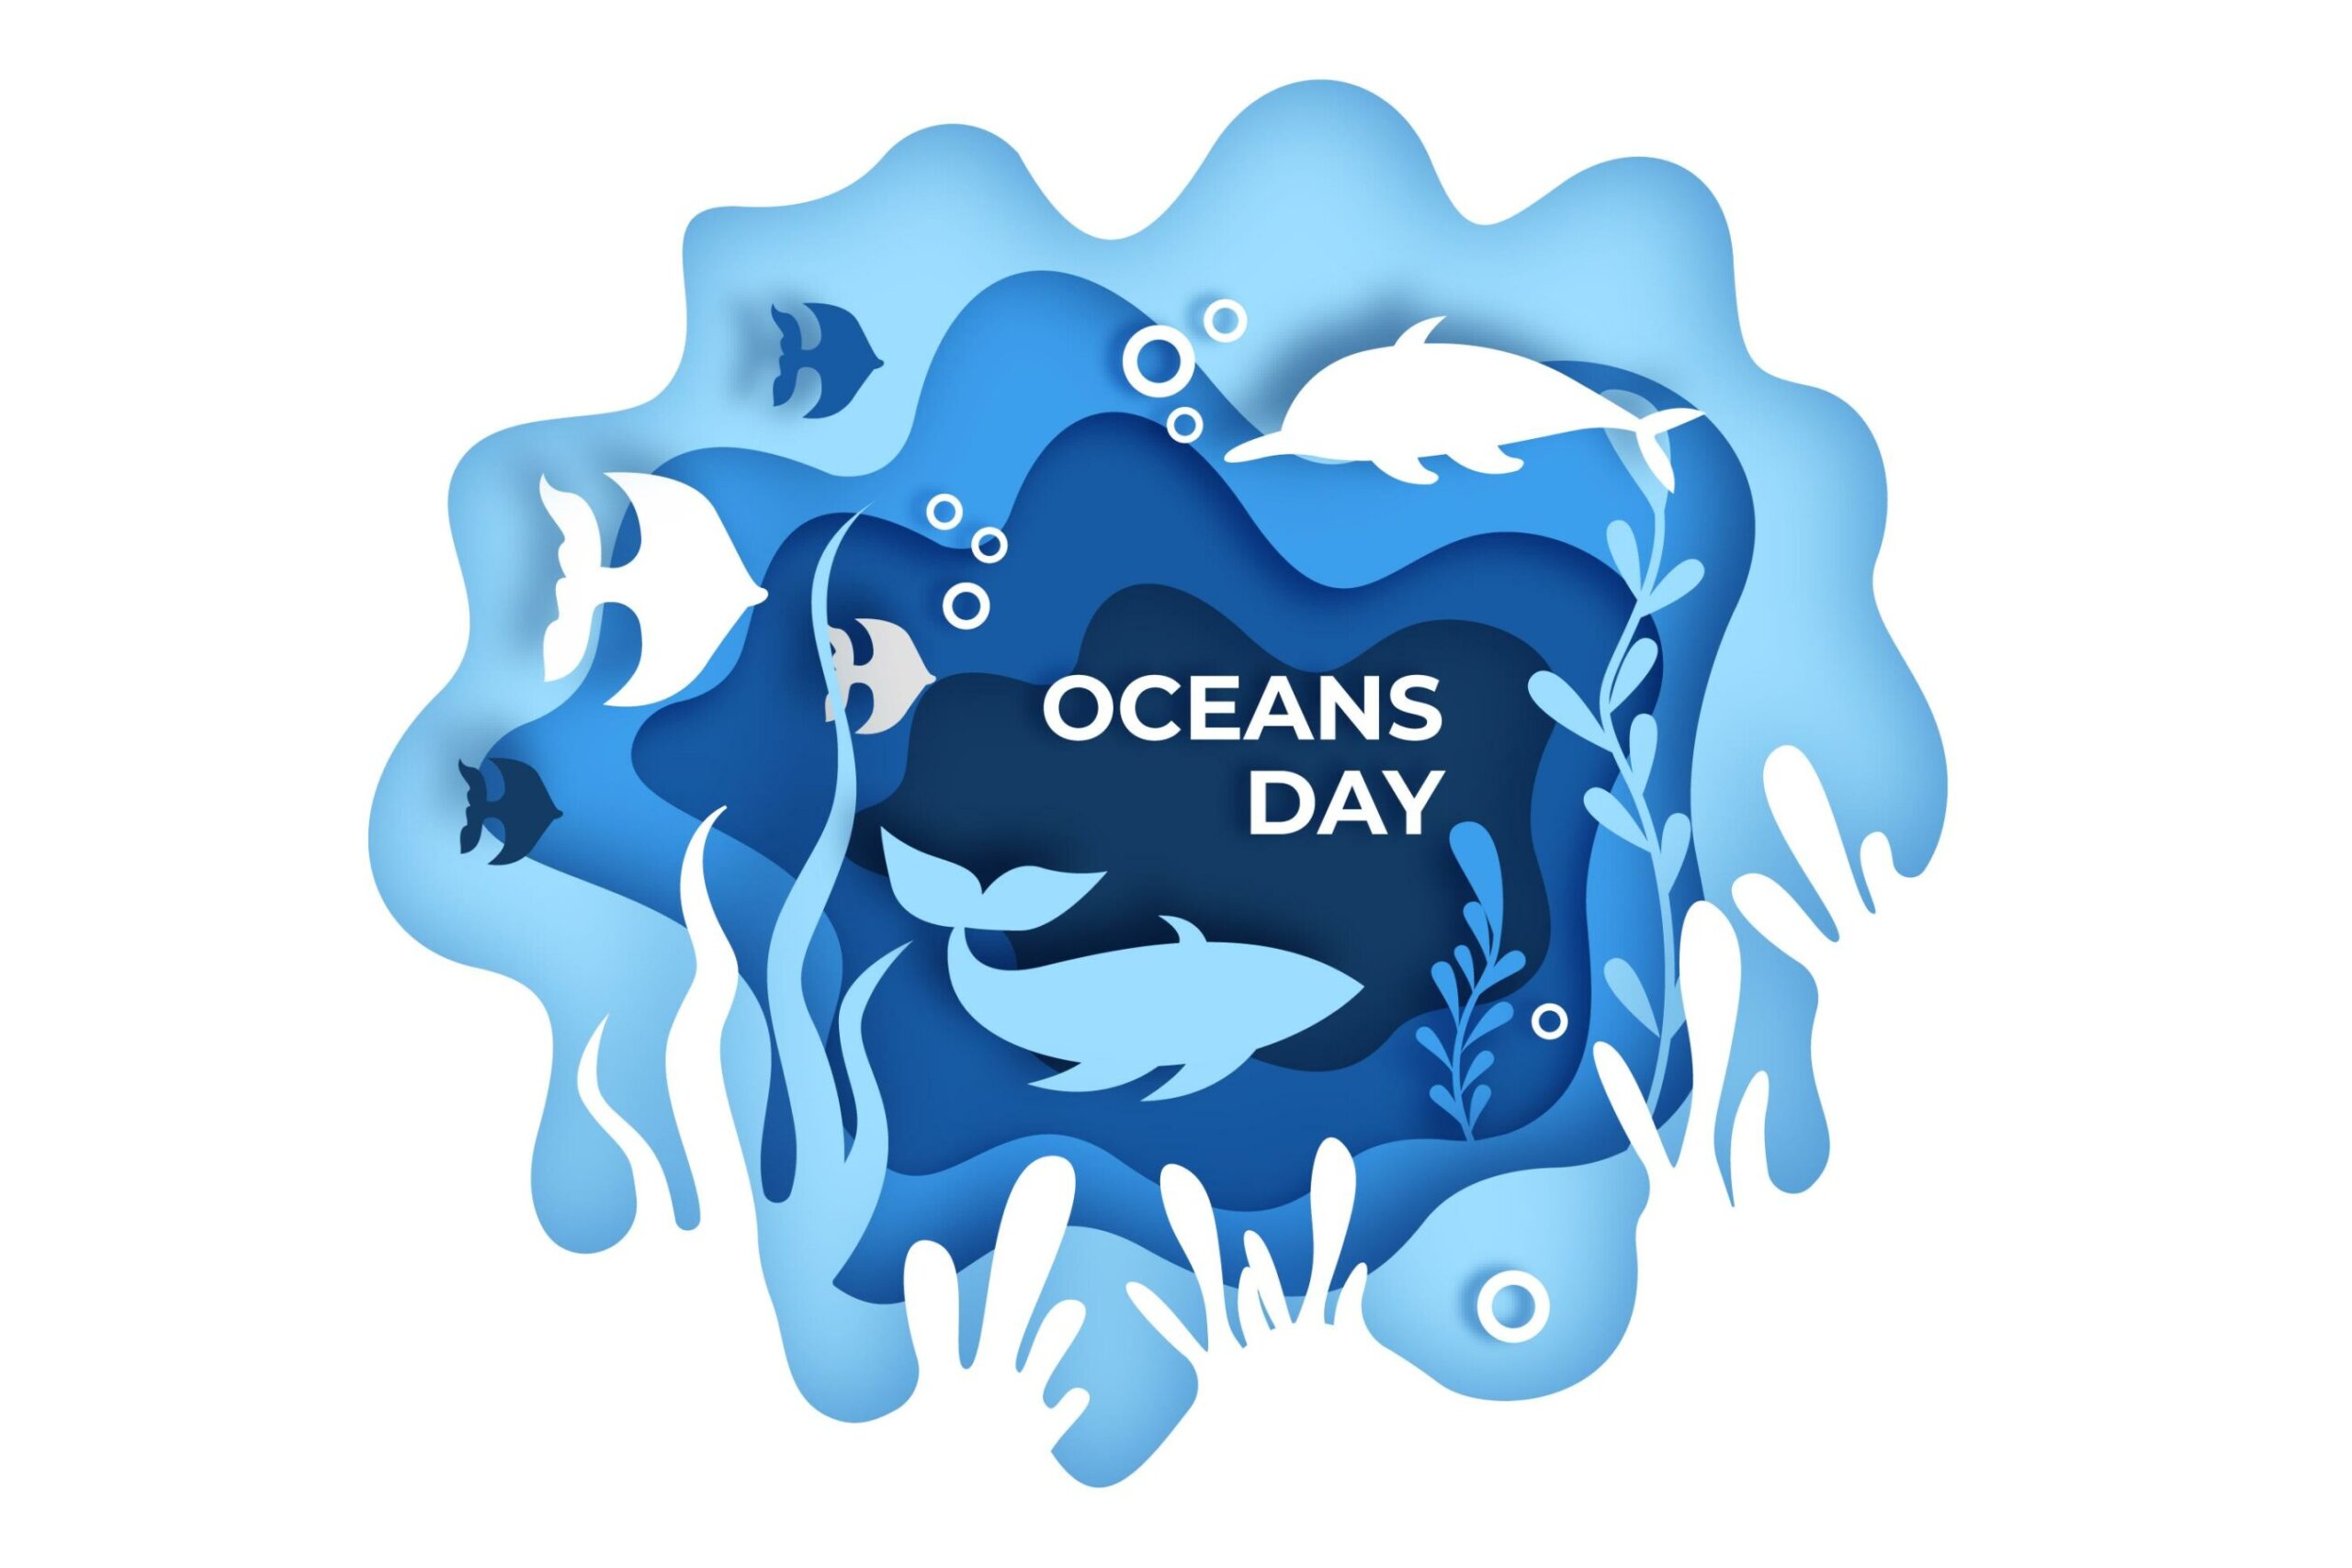 World Oceans Day Captions 2022 With Hashtags!